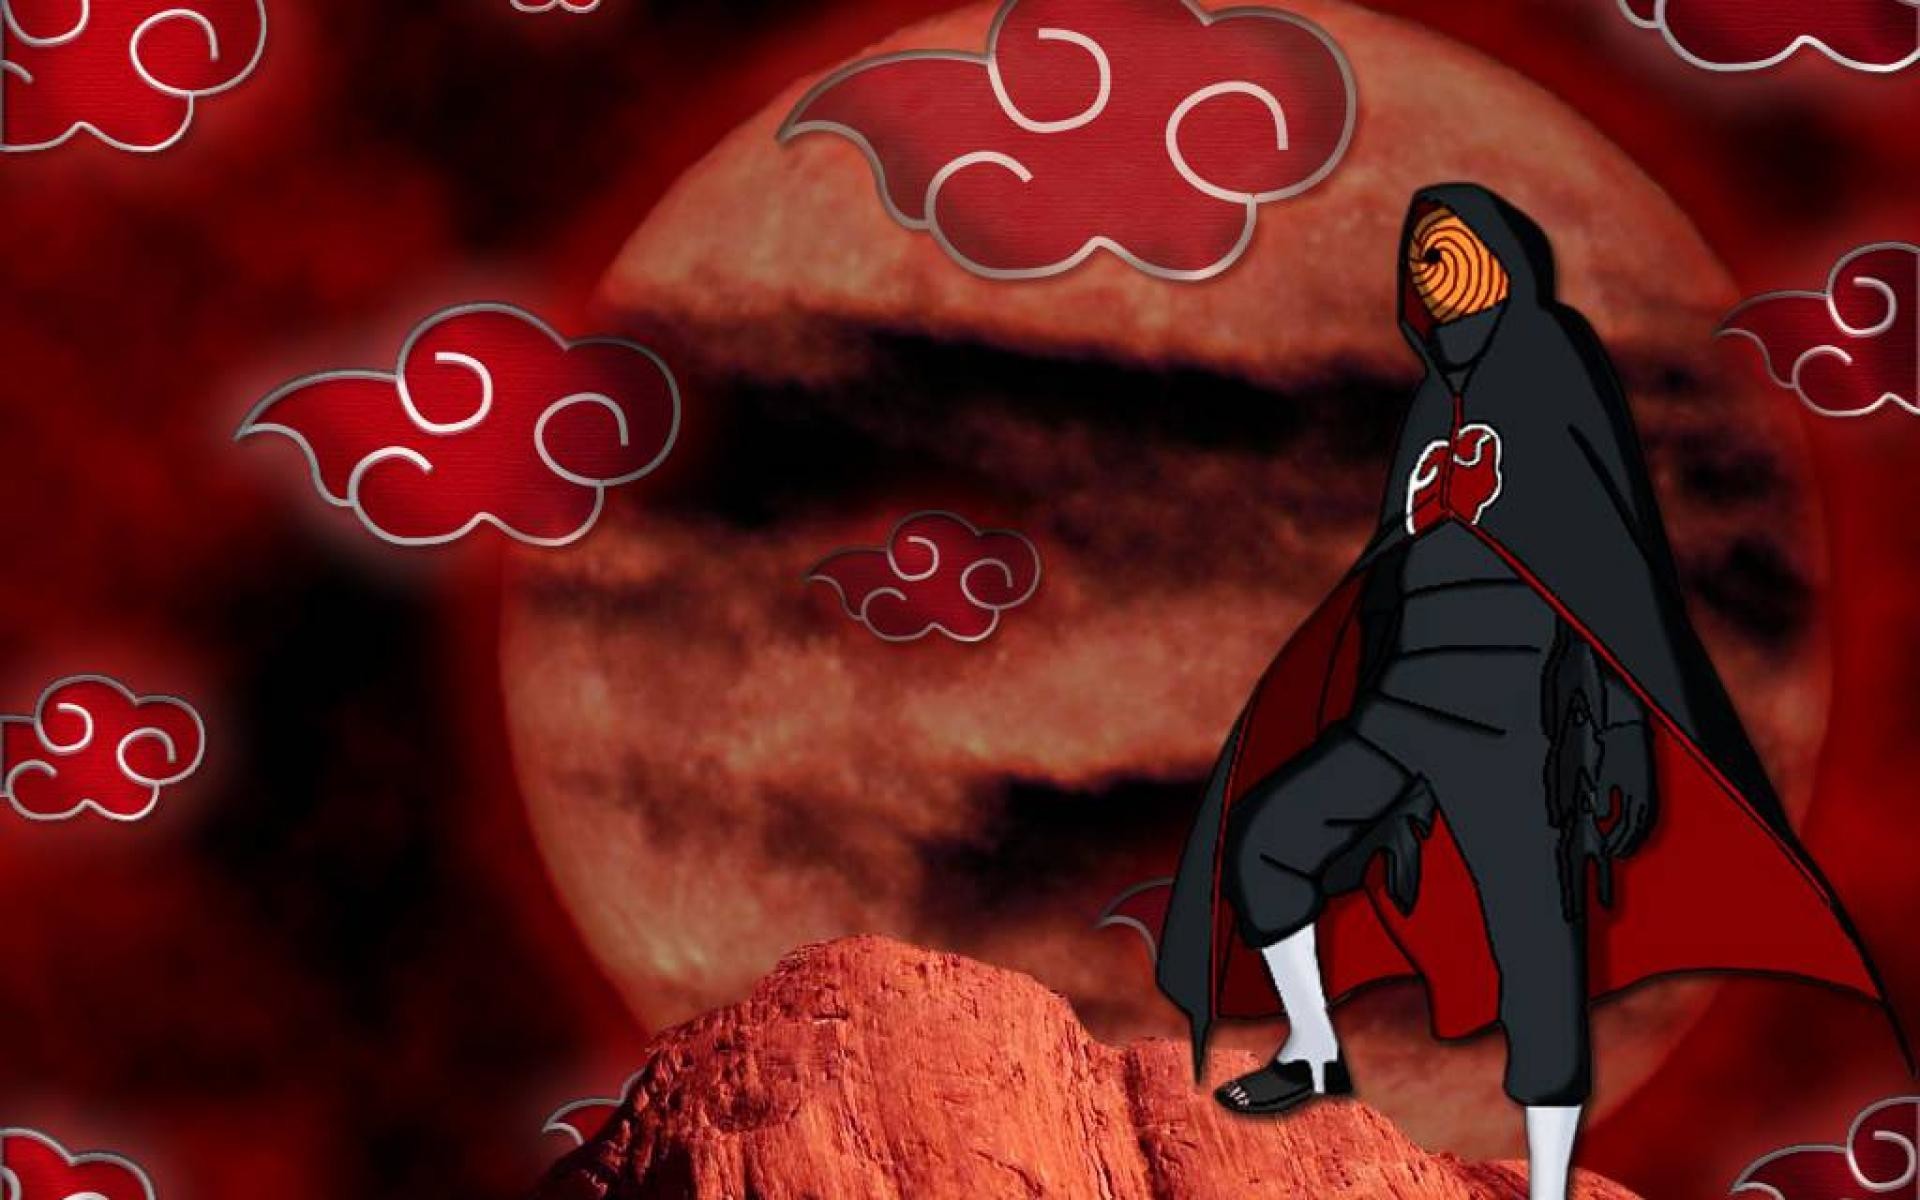 obito live wallpaper,red,naruto,anime,animation,fictional character